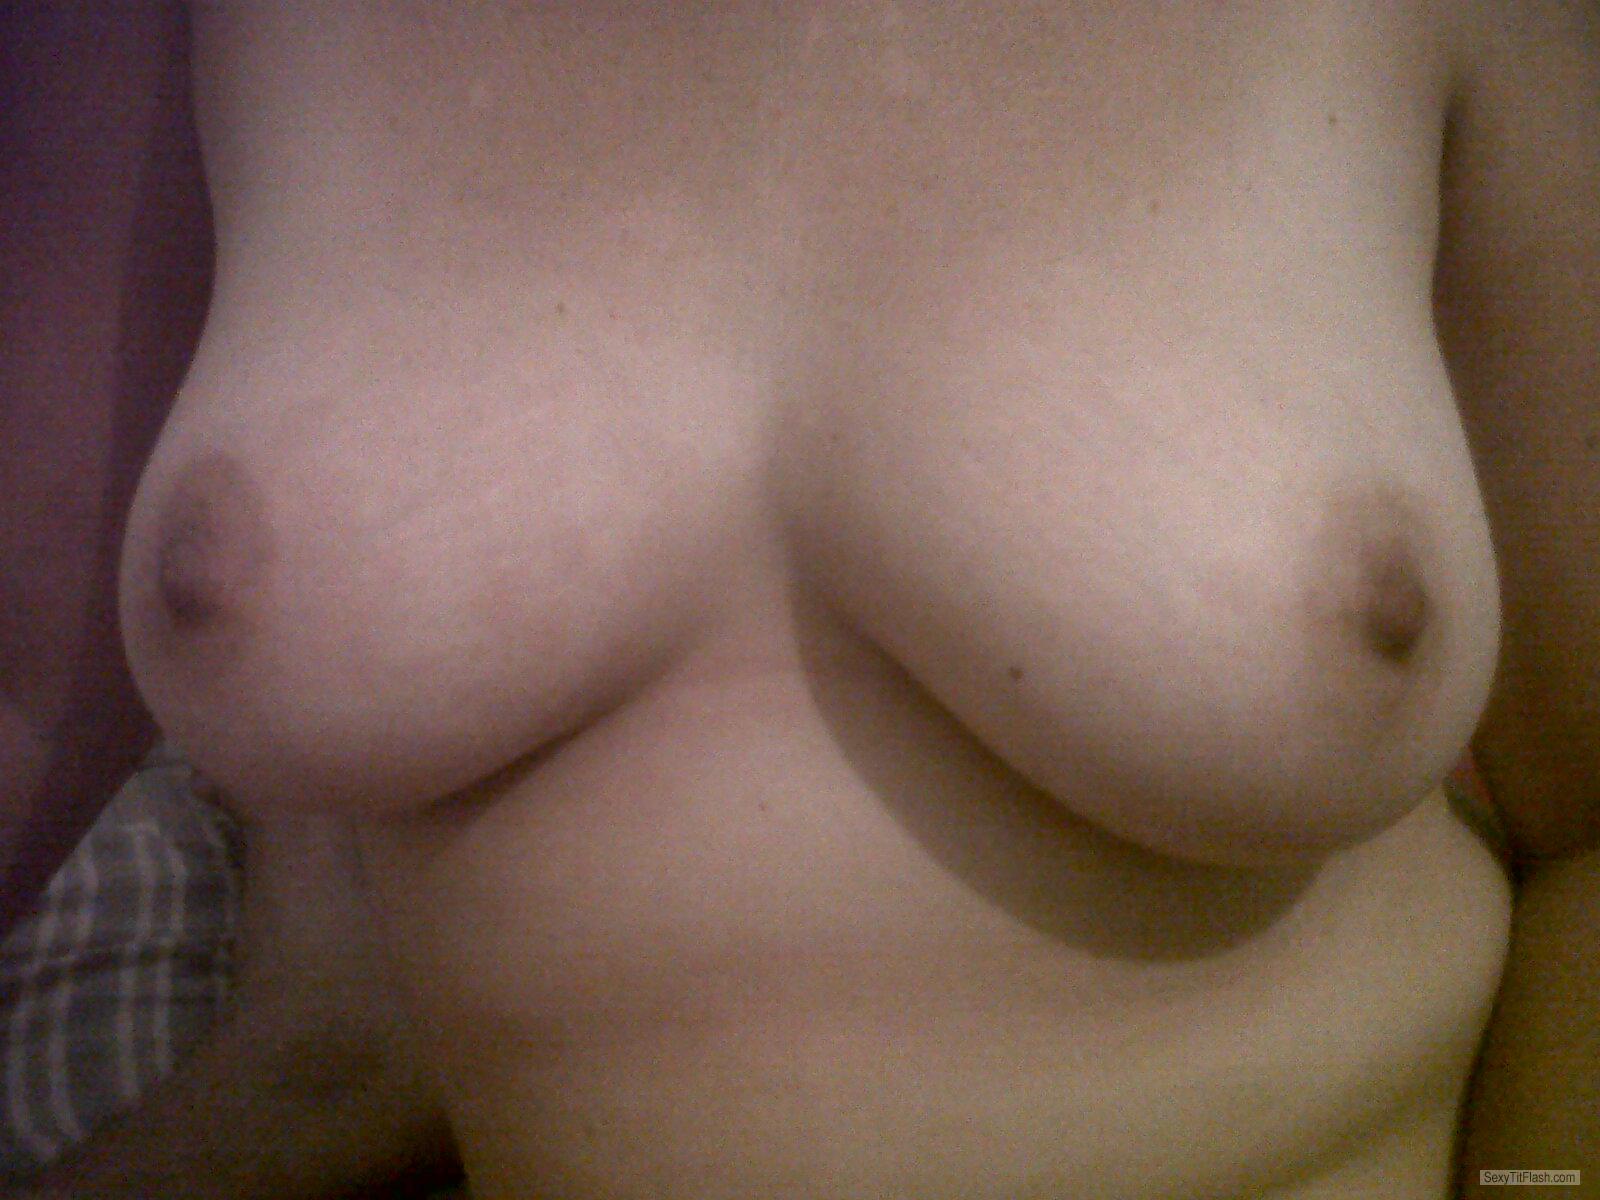 Tit Flash: Wife's Medium Tits - HOT OR NOT from South Africa